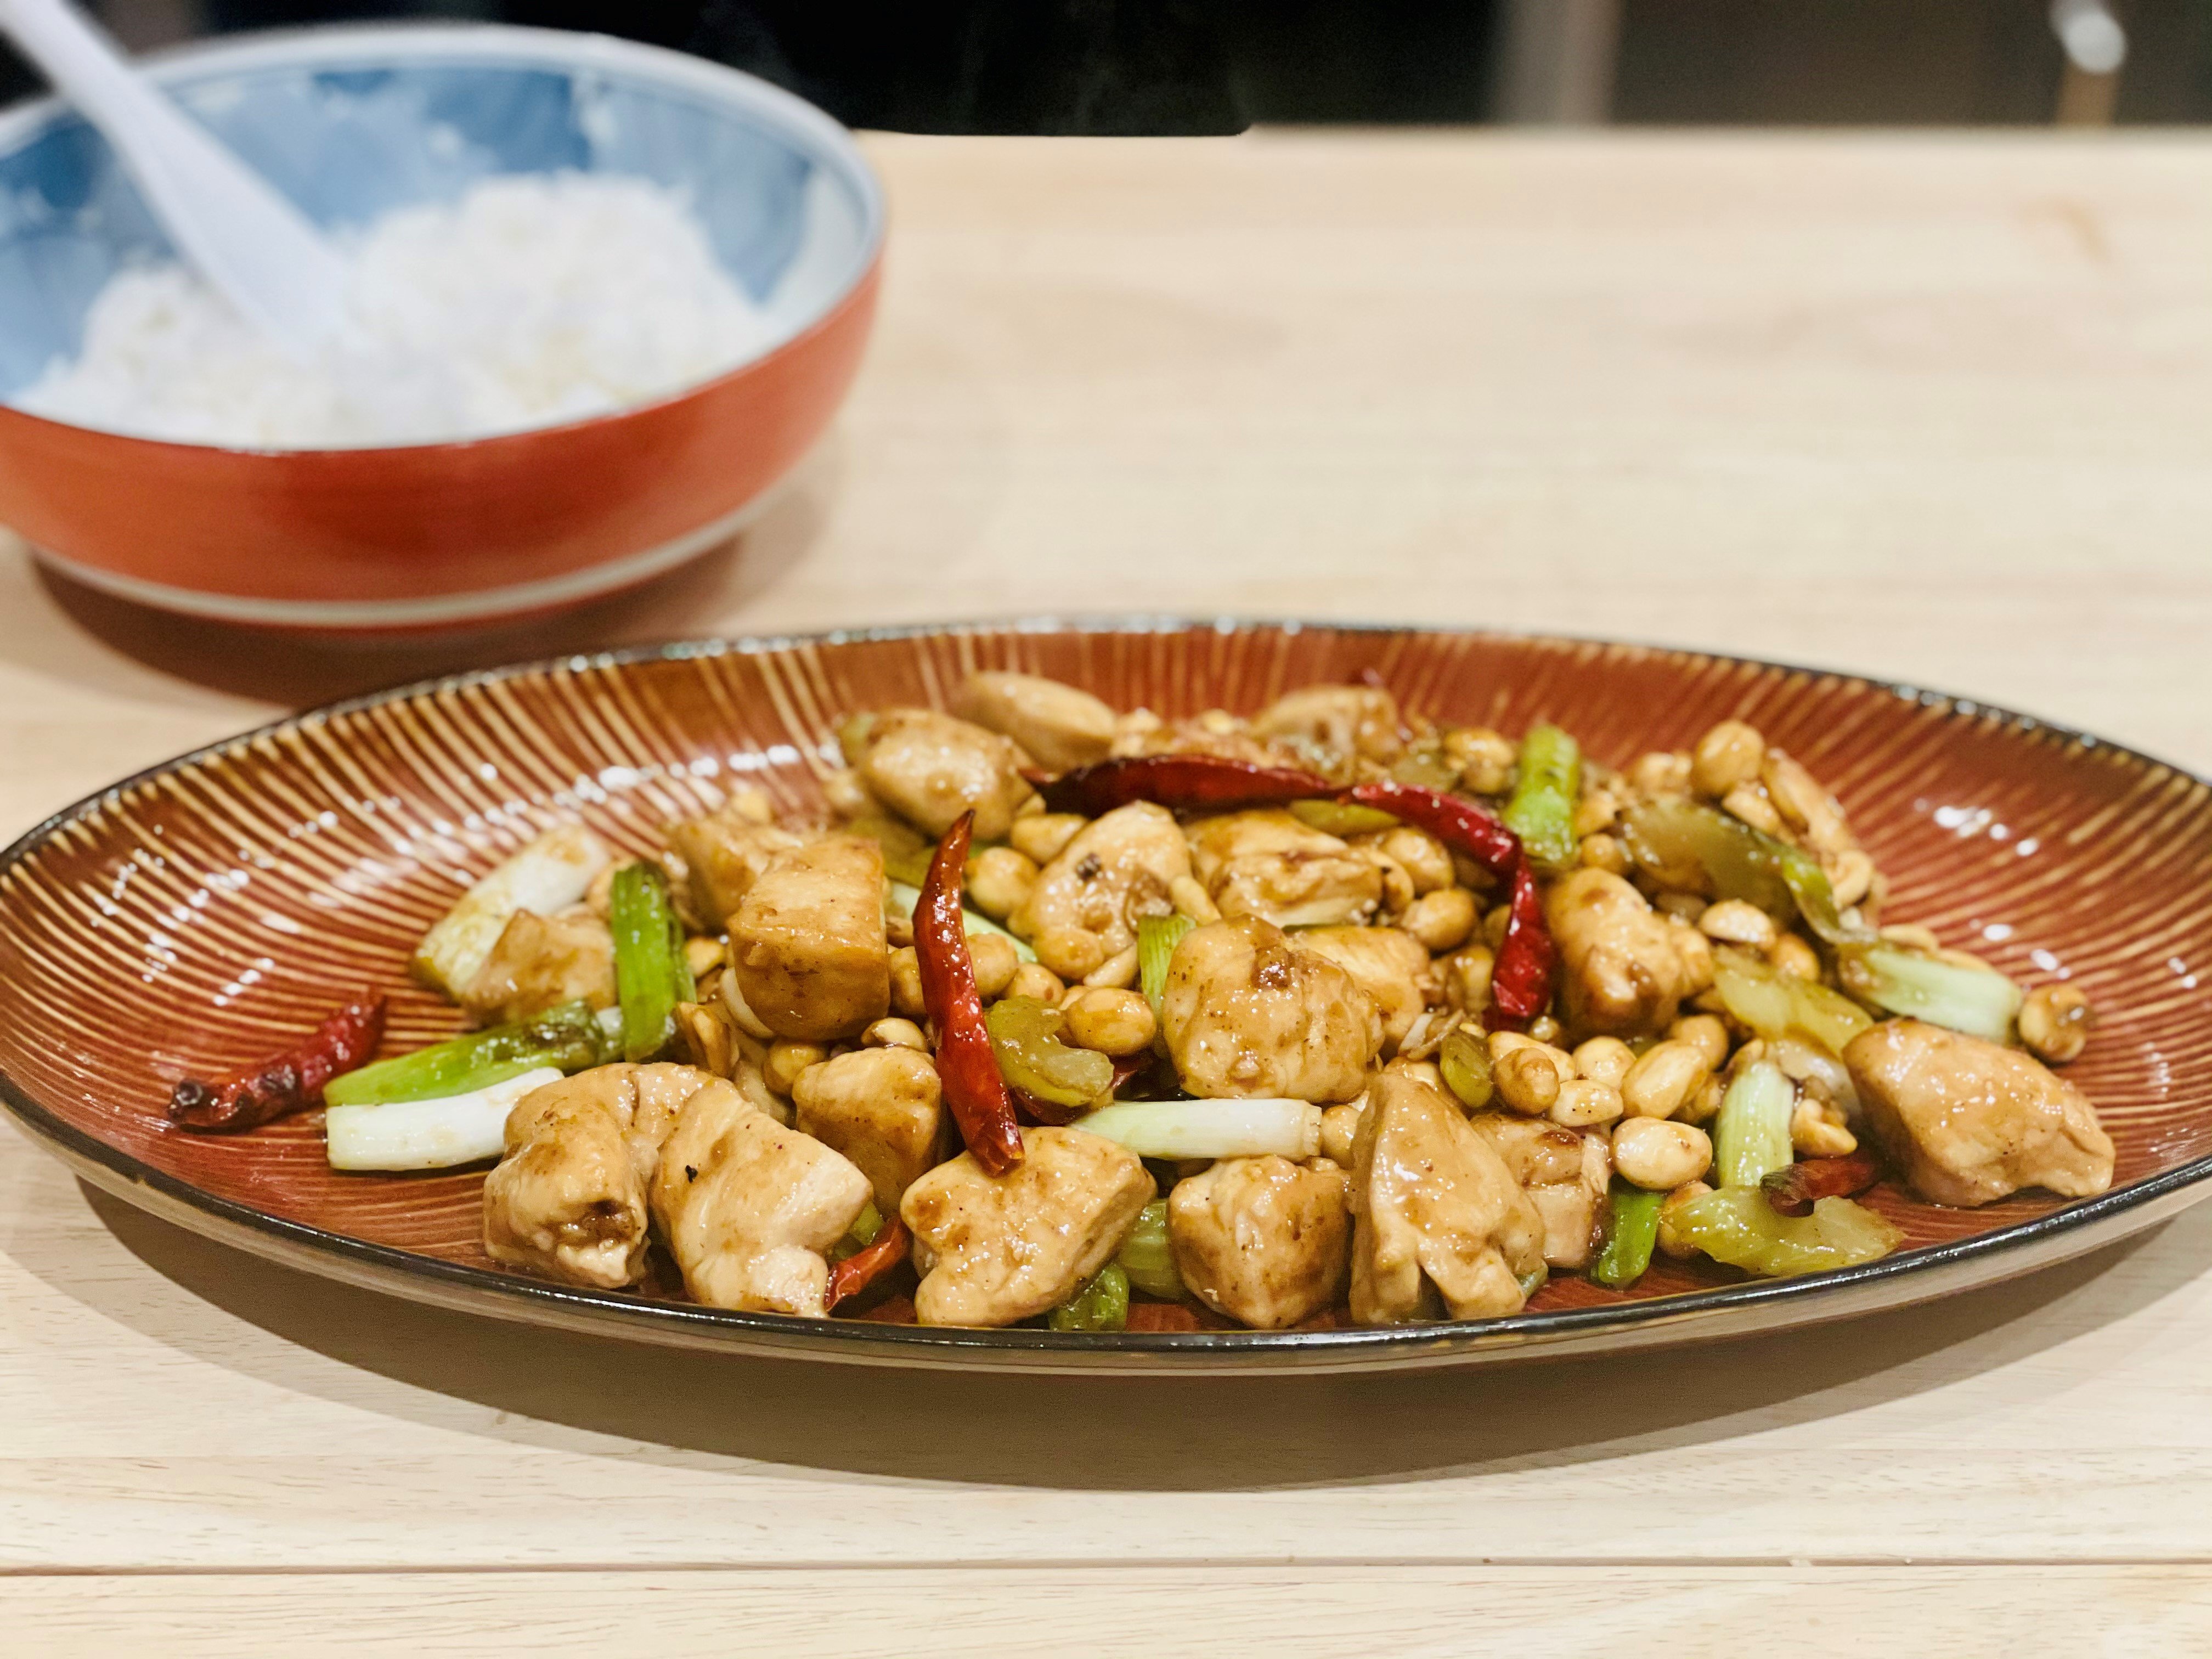 https://www.thechoppingblock.com/hubfs/Blog/kung%20pao%20chicken%20with%20rice.jpg#keepProtocol